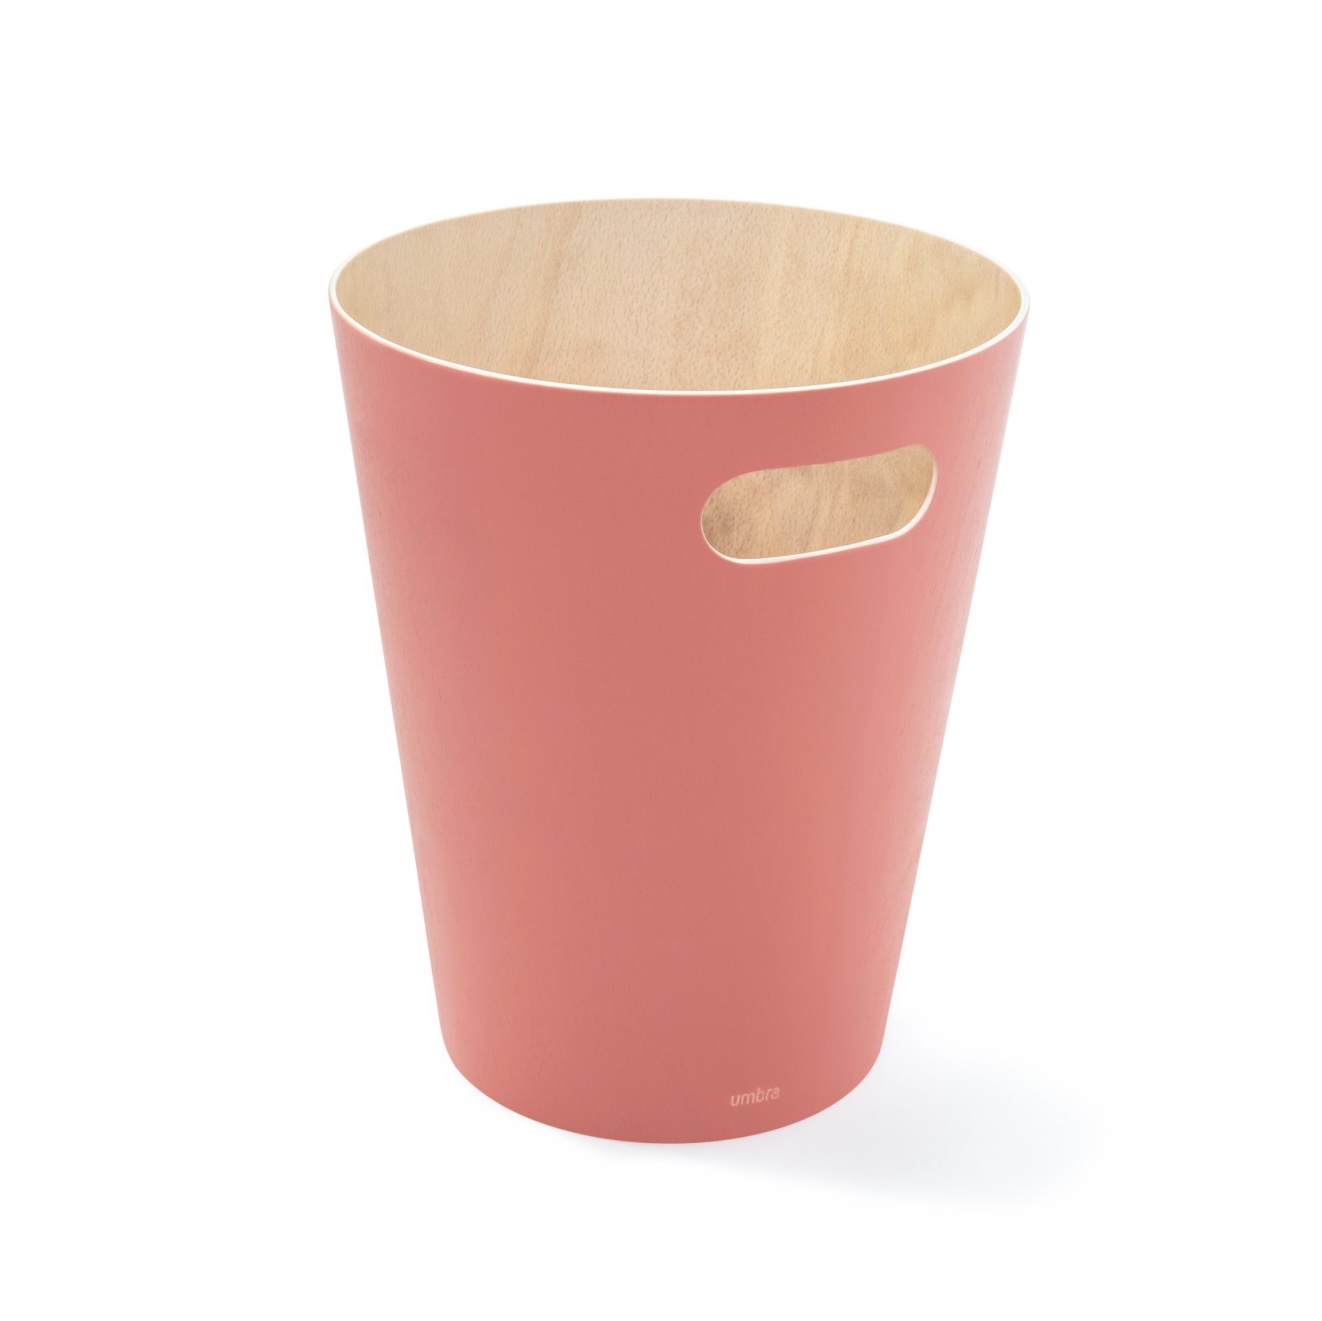 Umbra 7.5 Litre Natural and Coral Woodrow Waste Bin